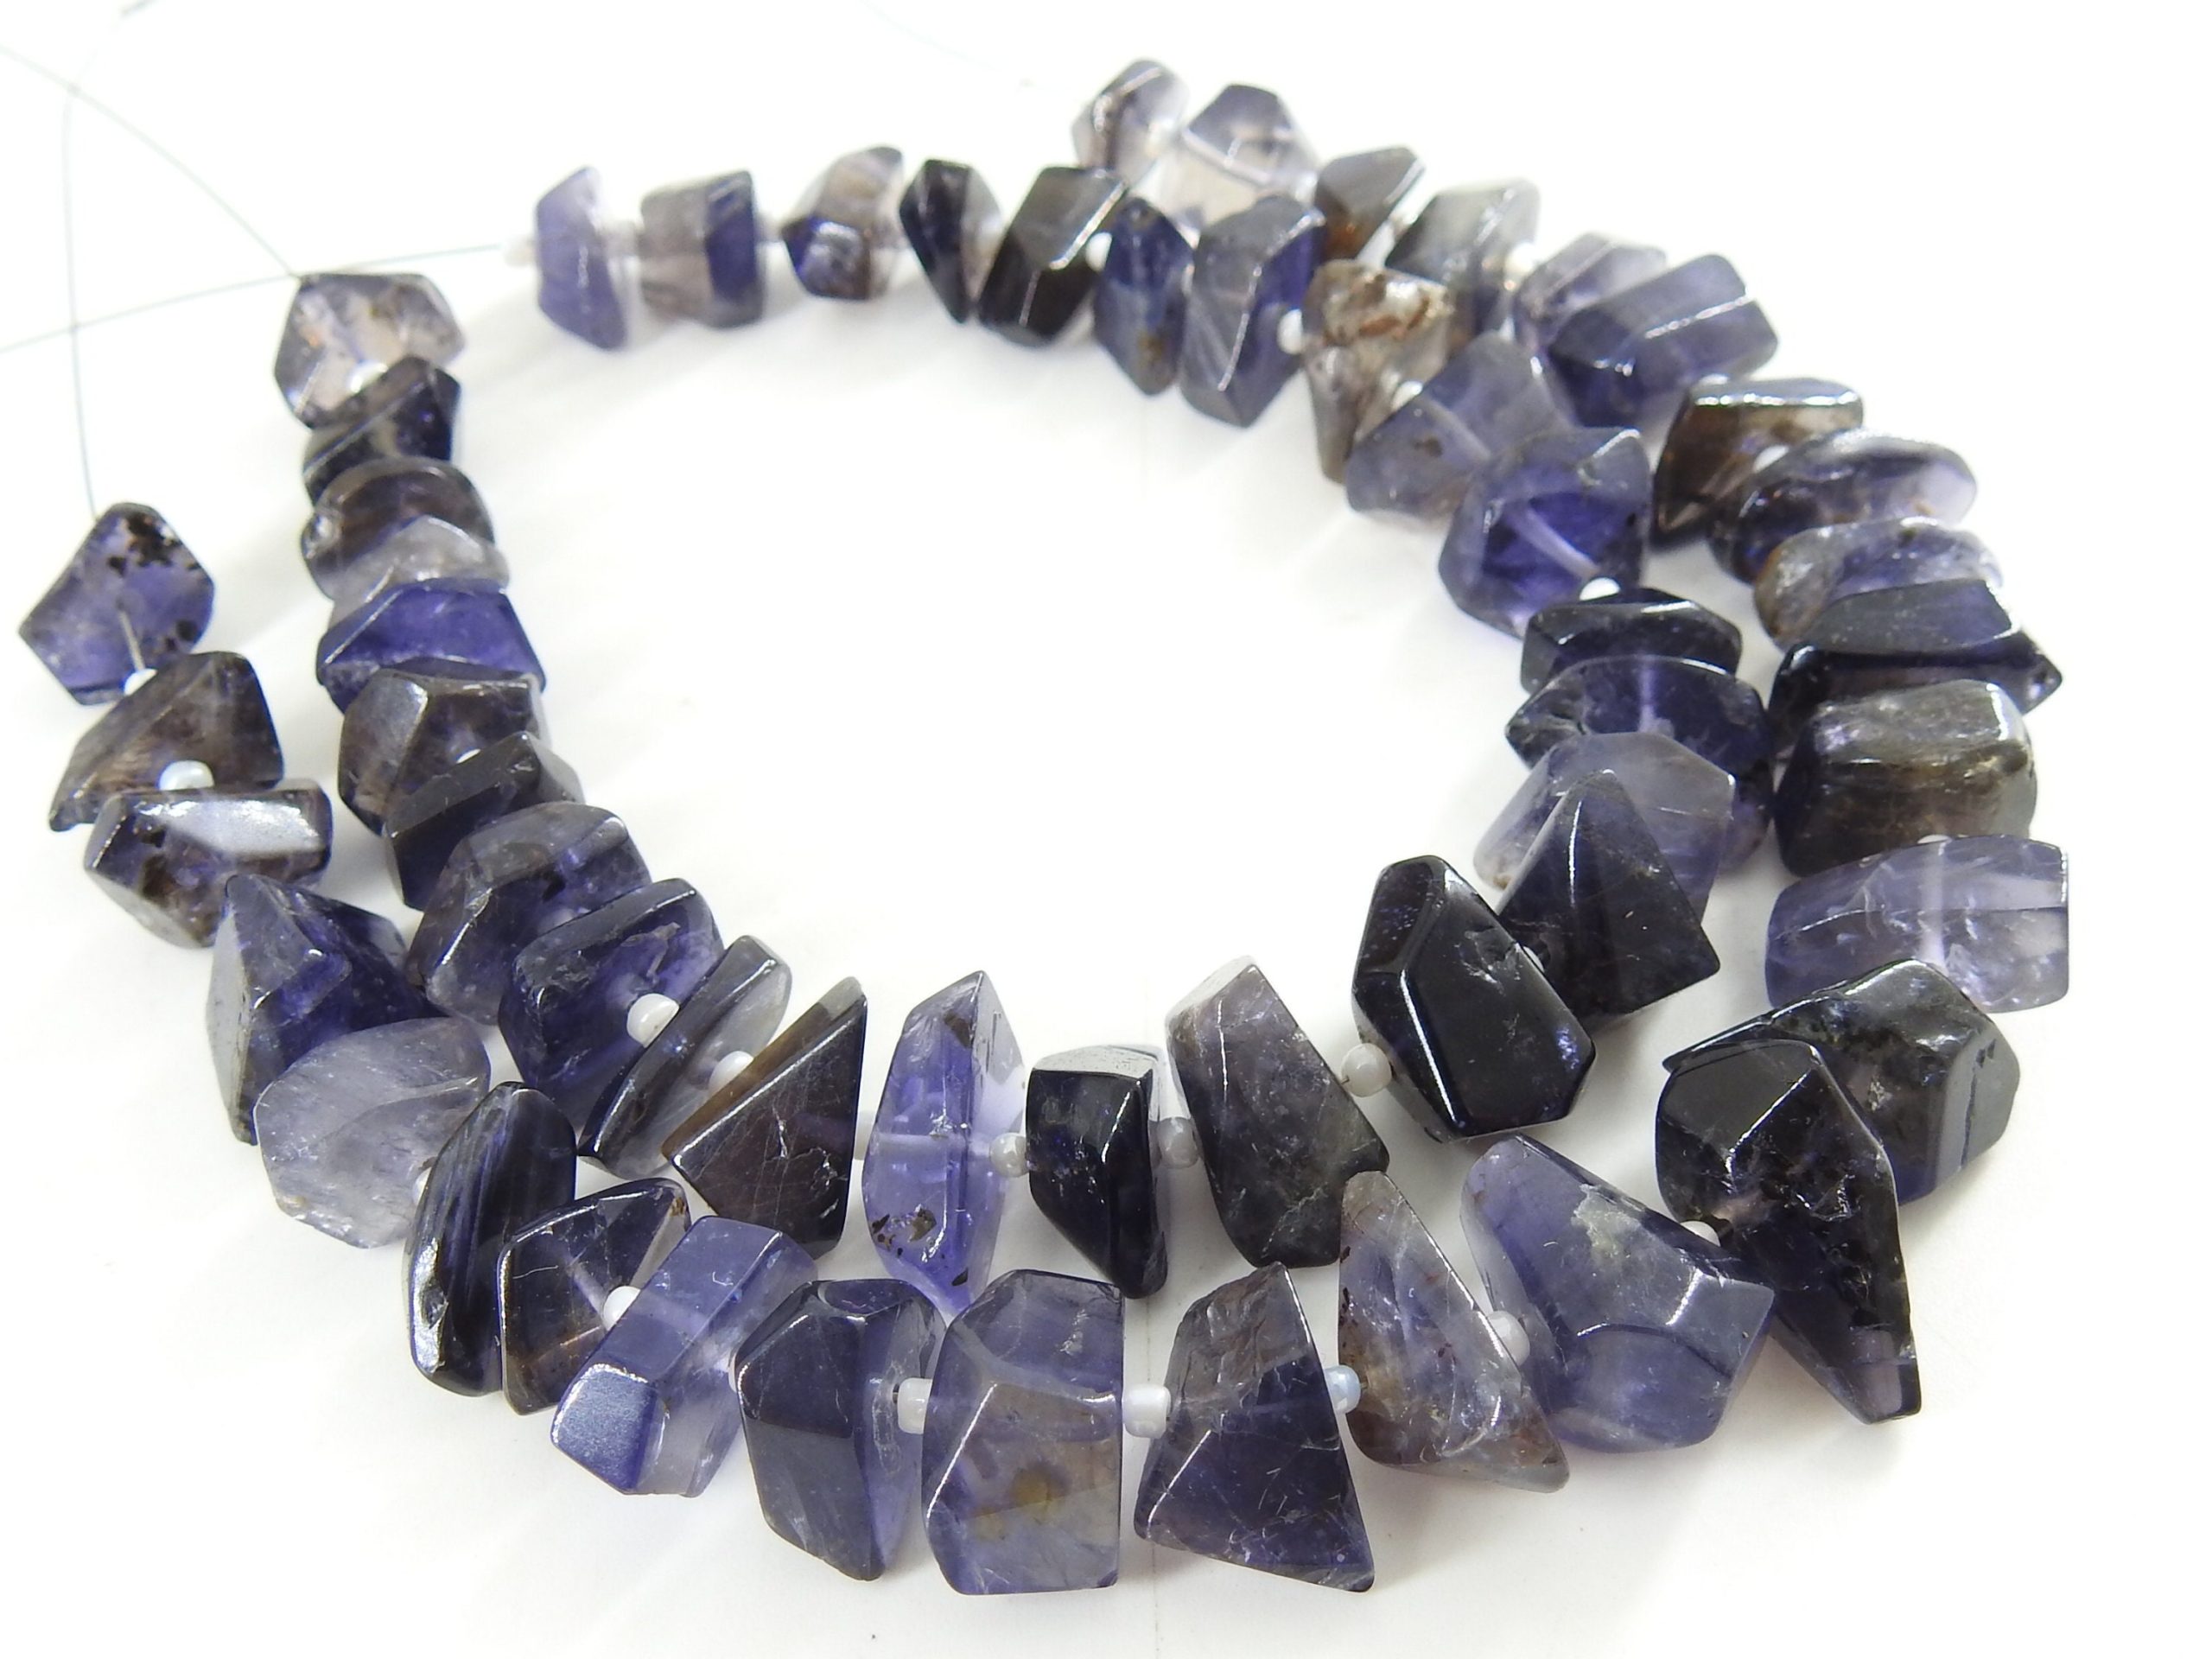 Iolite Faceted Tumble Beads,Nuggets,Irregular Shape,Loose Stone,Handmade,For Making Jewelry,Bracelet, 8Inch 18-10MM Approx,100%Natural TU5 | Save 33% - Rajasthan Living 13